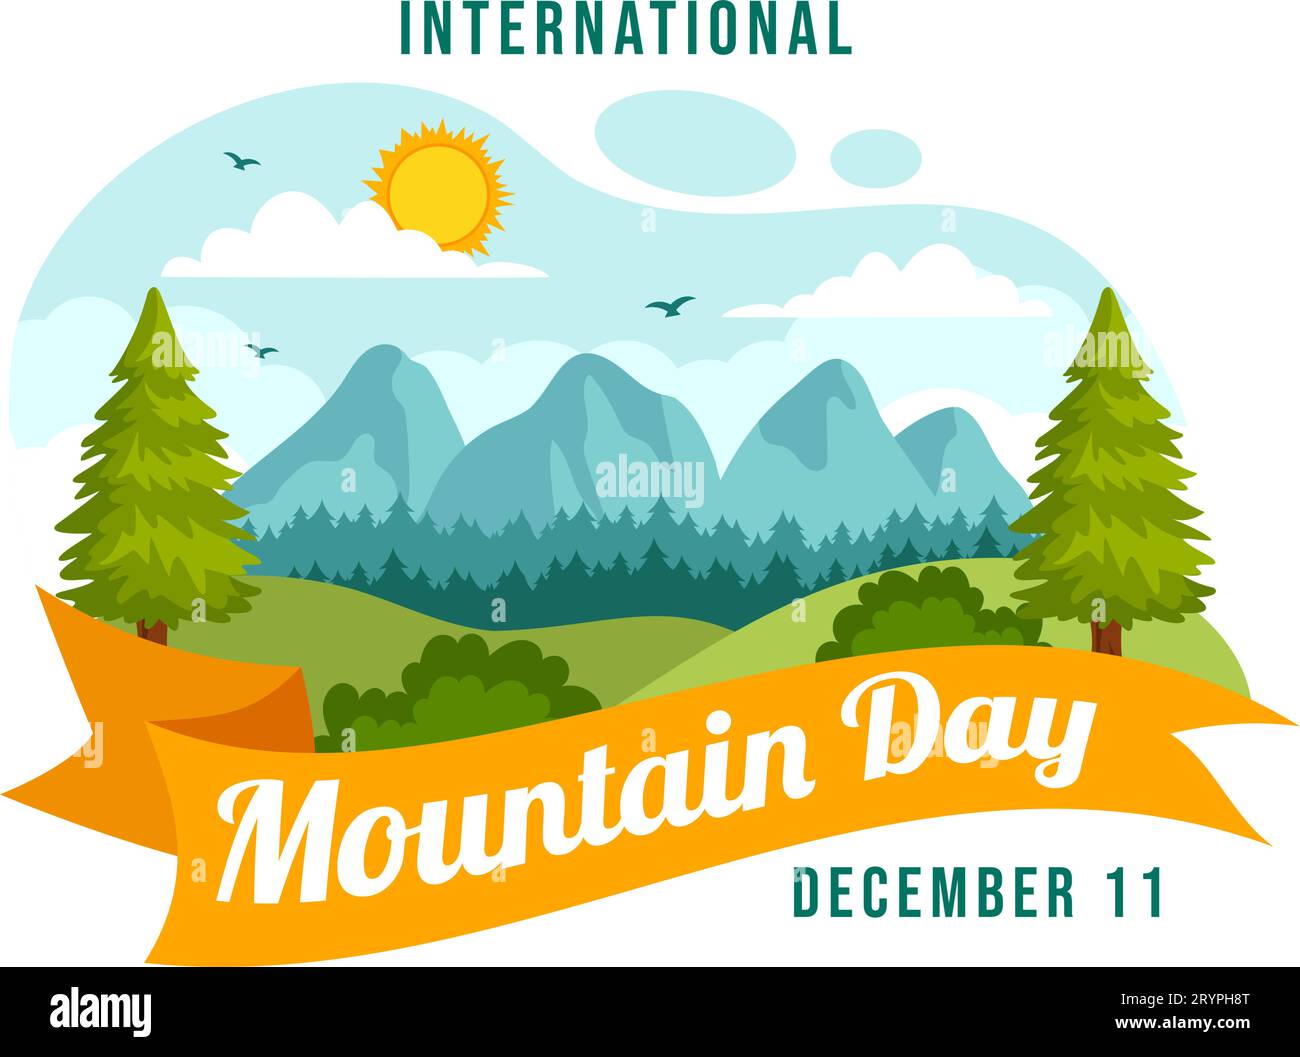 International Mountain Day Vector Illustration on December 11 with Mountains Panorama, Green Valley and Trees in Flat Cartoon Background Design Stock Vector